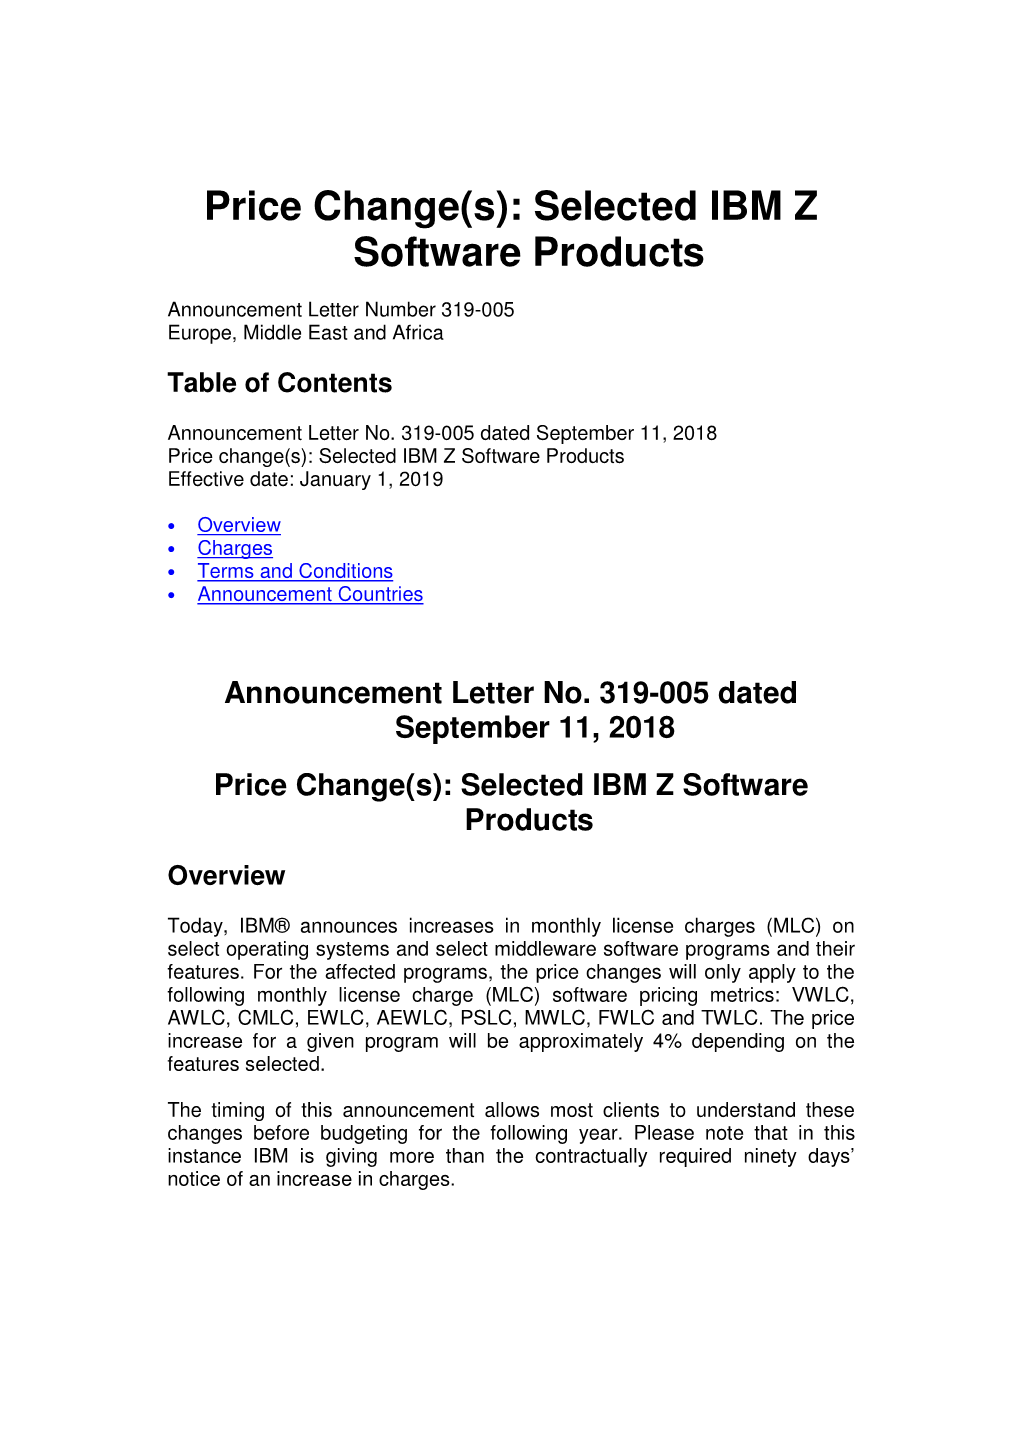 Price Change(S): Selected IBM Z Software Products